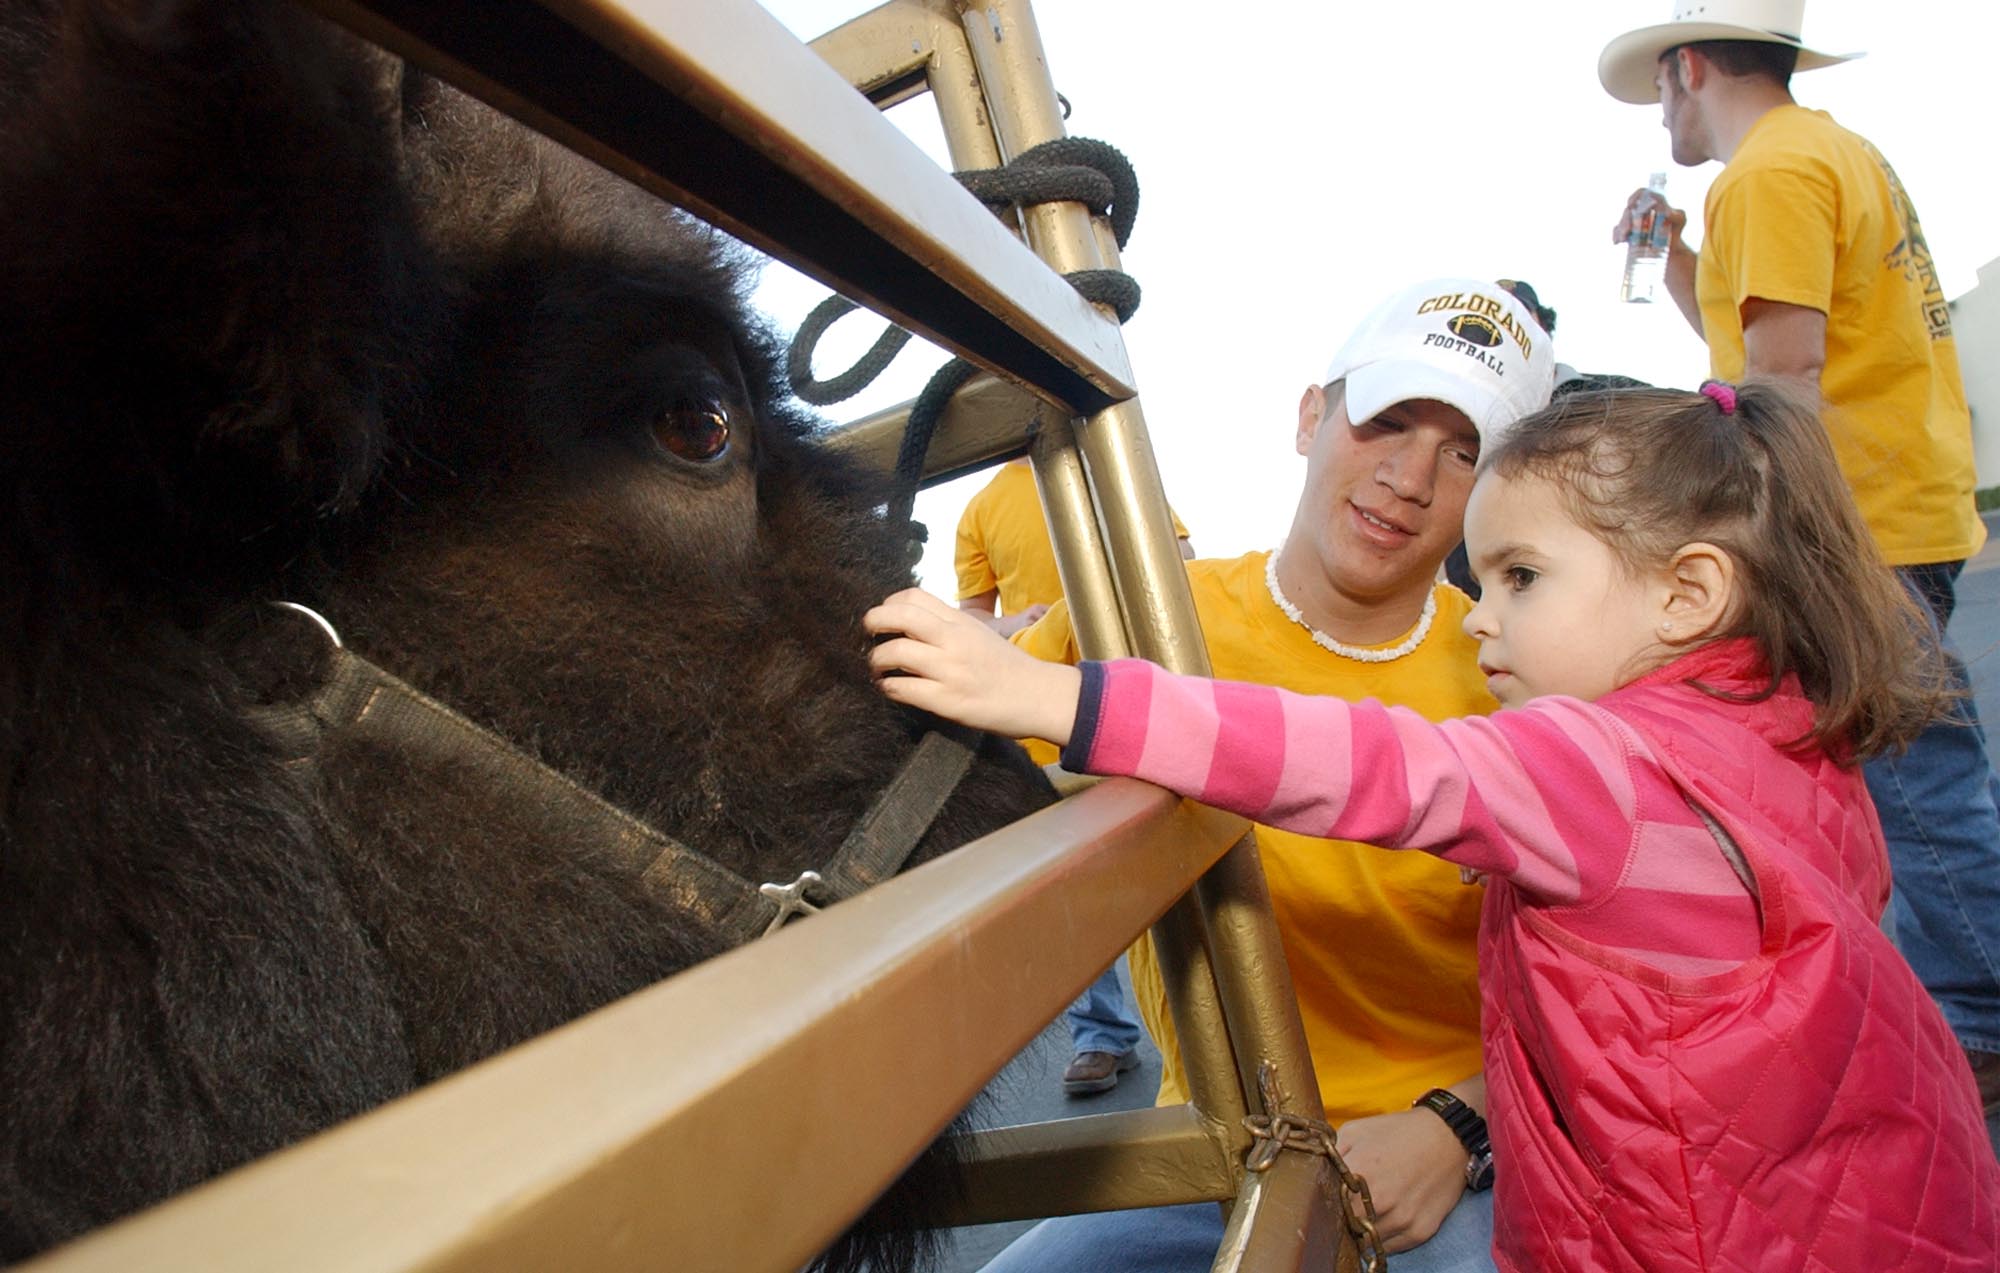 Kennedy Parker, 3,  from Pheonix, Arizona pets Ralphie IV, the Colorado Buffalo Mascot, in his pen outside the Outback Steak House in Tempe as he was on display for patrons before the 2002 Tostitos Fiesta Bowl in Tempe, Arizona this Tuesday, New Years day. Behind, Ralphie IV handler Kenny Rogers helps Kennedy pet Ralphie.(Photo by Jon Hatch/Digital First Media/Boulder Daily Camera via Getty Images)